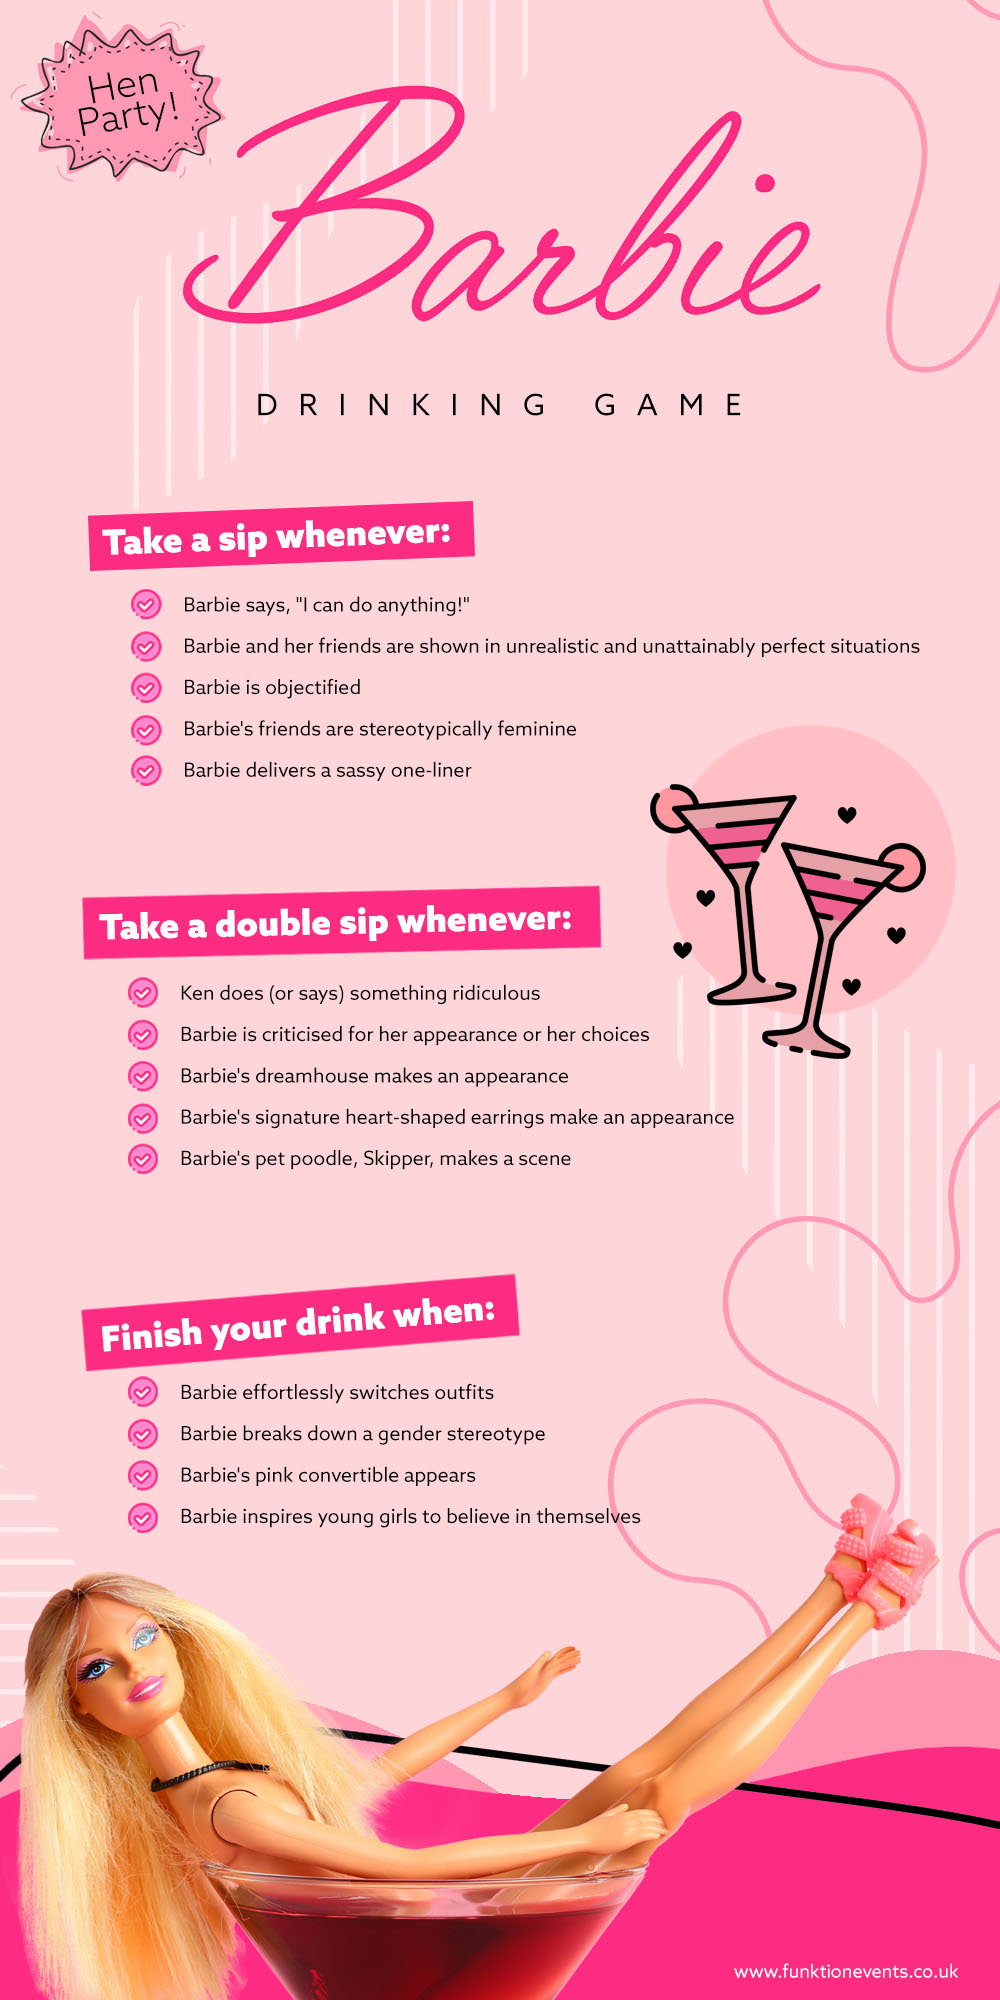 Barbie Hen Party Drinking Game Infographic